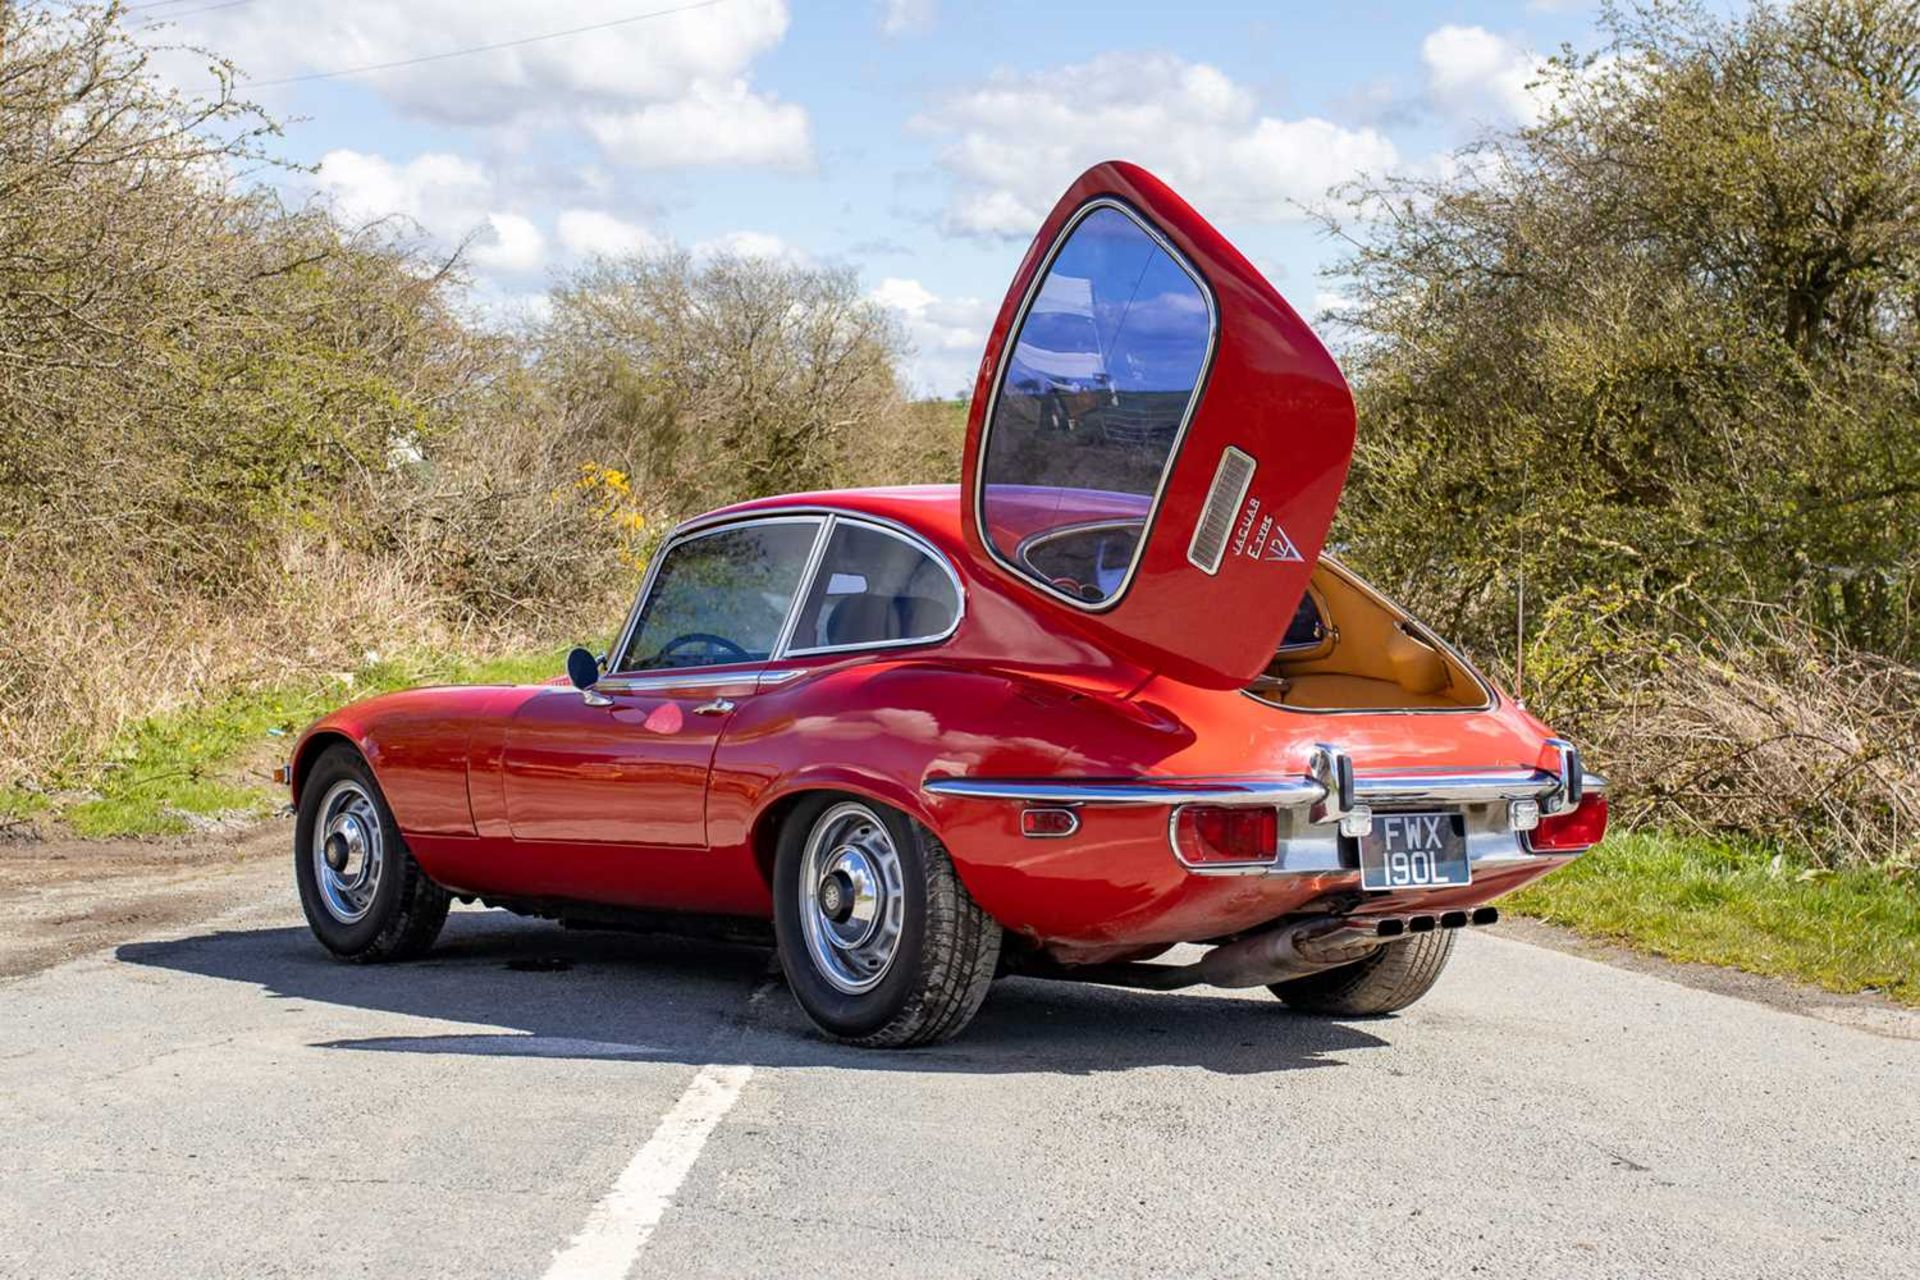 1973 Jaguar E-Type Coupe 5.3 V12 Three owners from new - Image 51 of 79